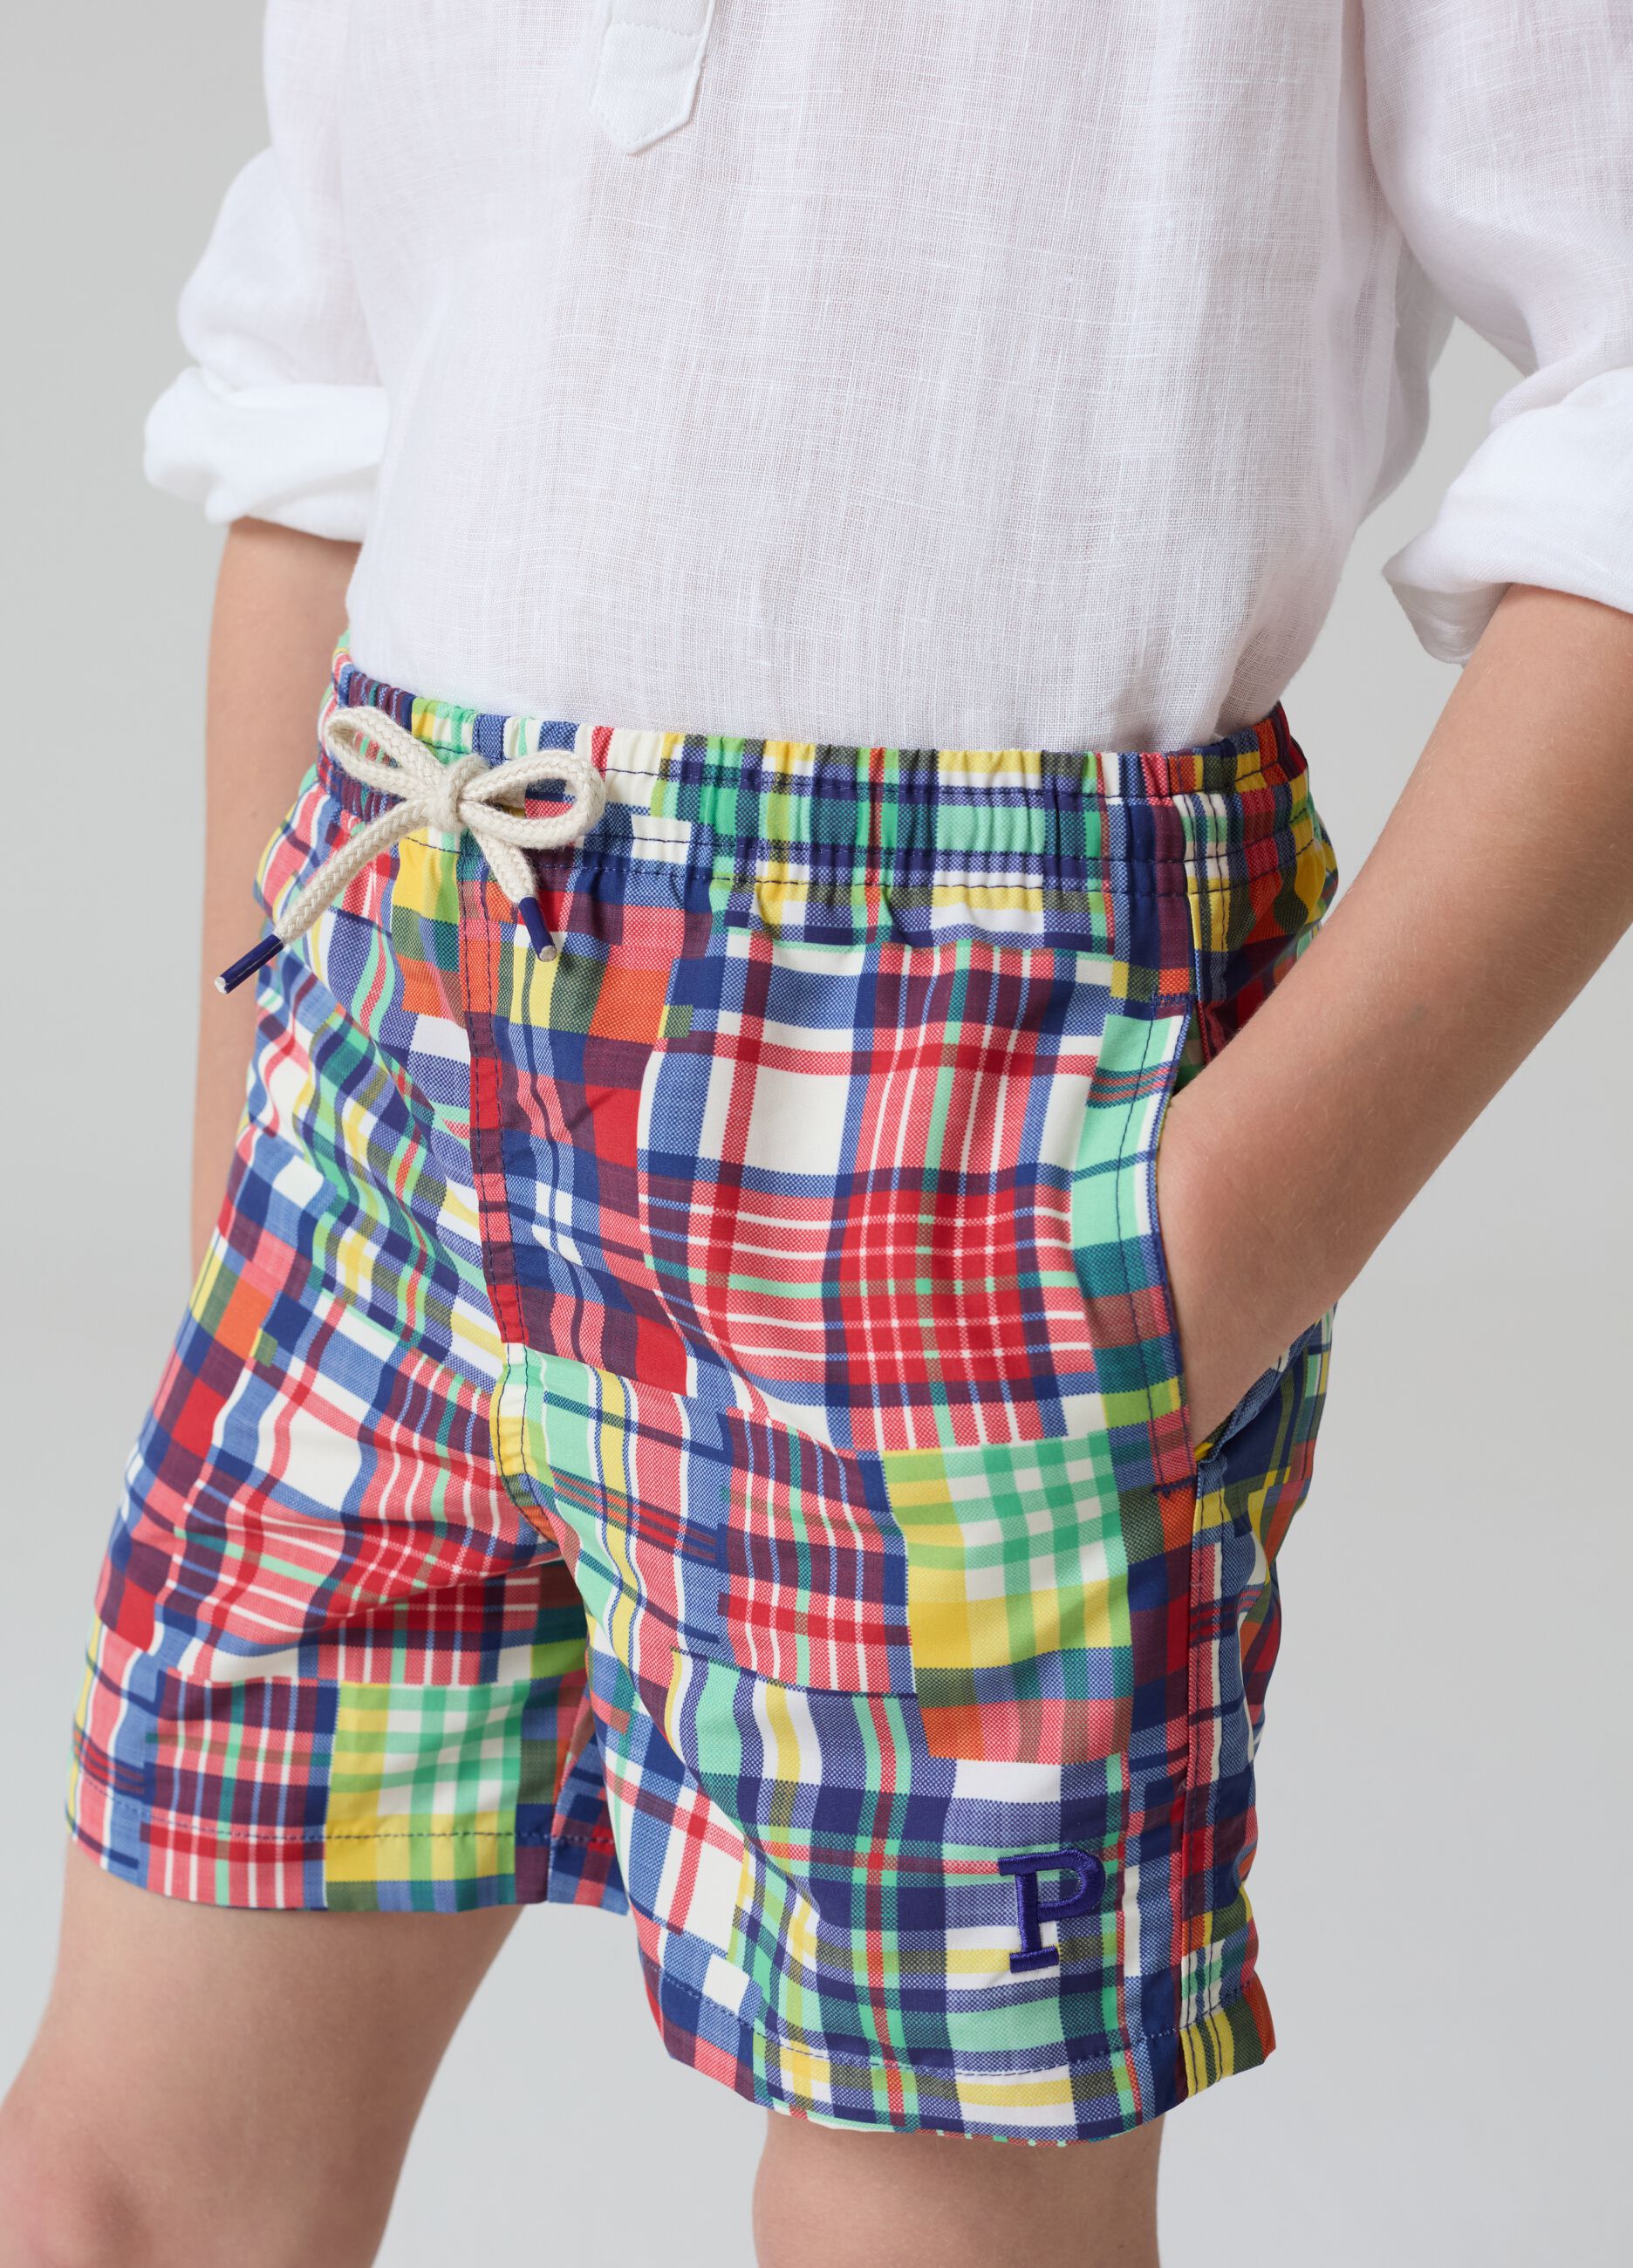 Swimming trunks with drawstring and check print